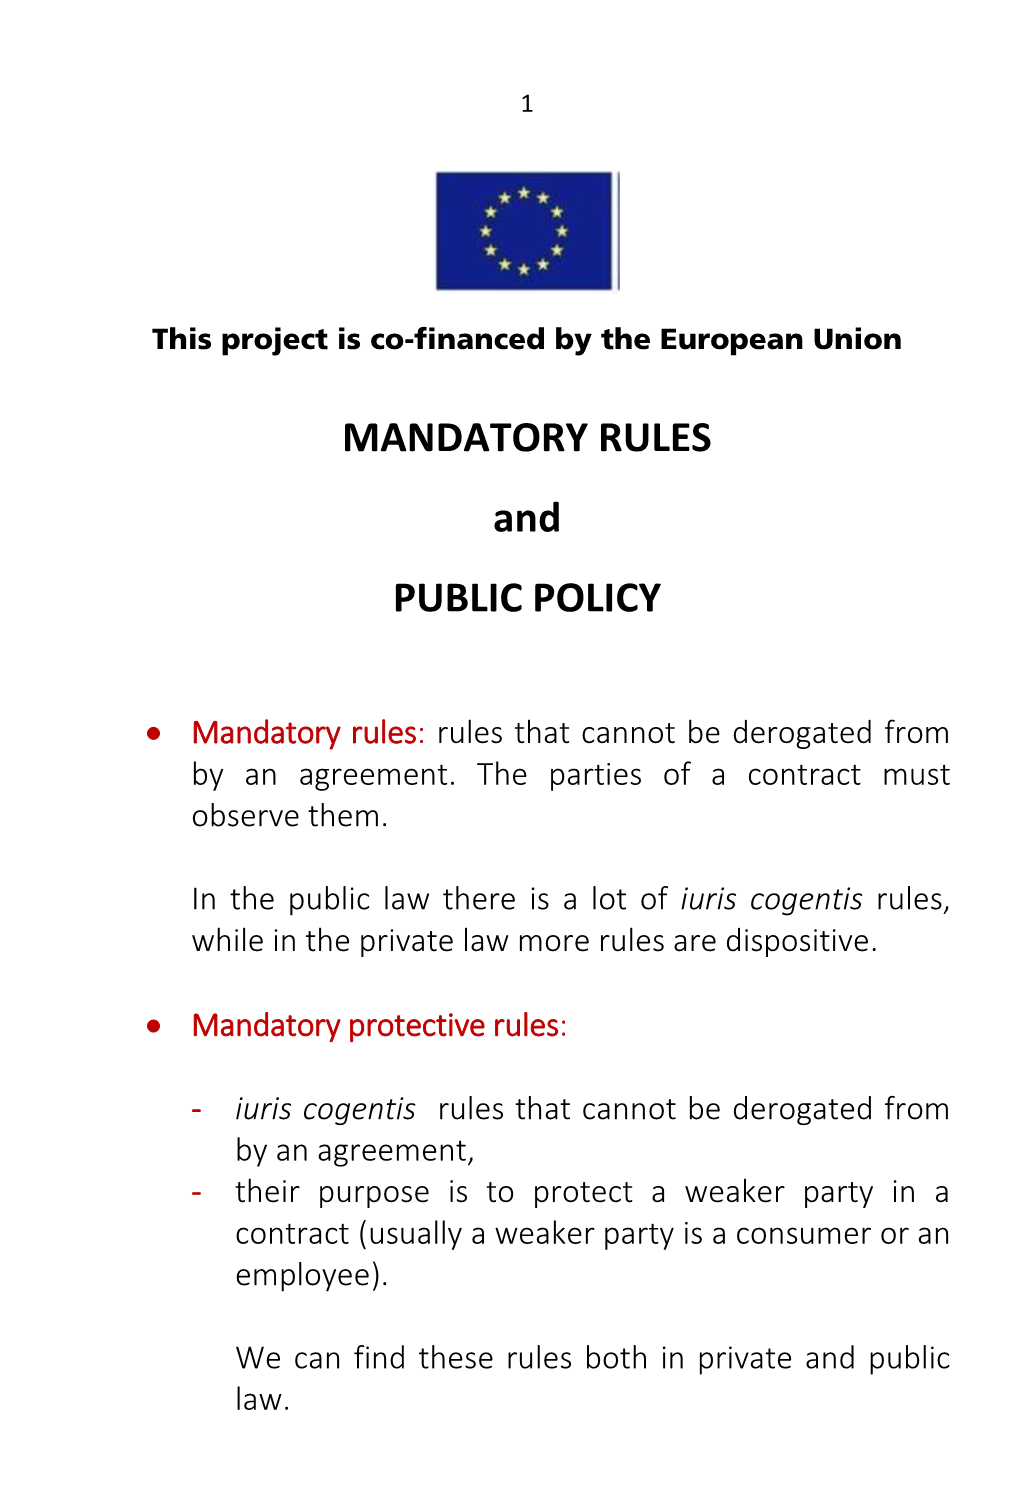 MANDATORY RULES and PUBLIC POLICY